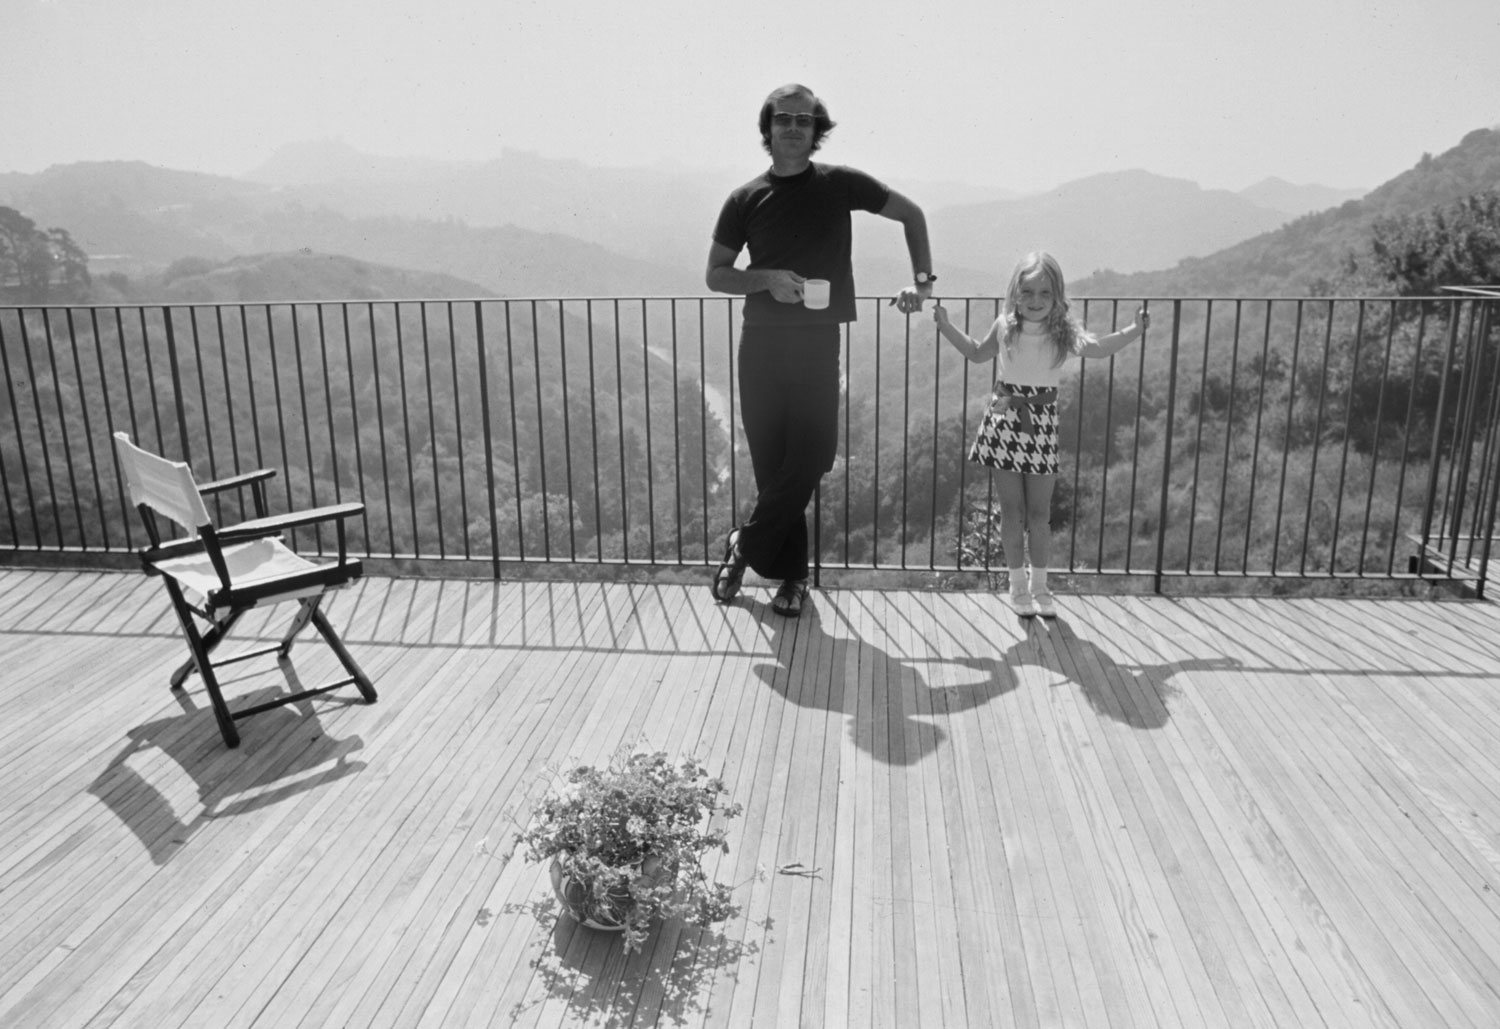 Jack Nicholson and his daughter, Jennifer, on the deck of his home overlooking Franklin Canyon, Los Angeles, 1969.